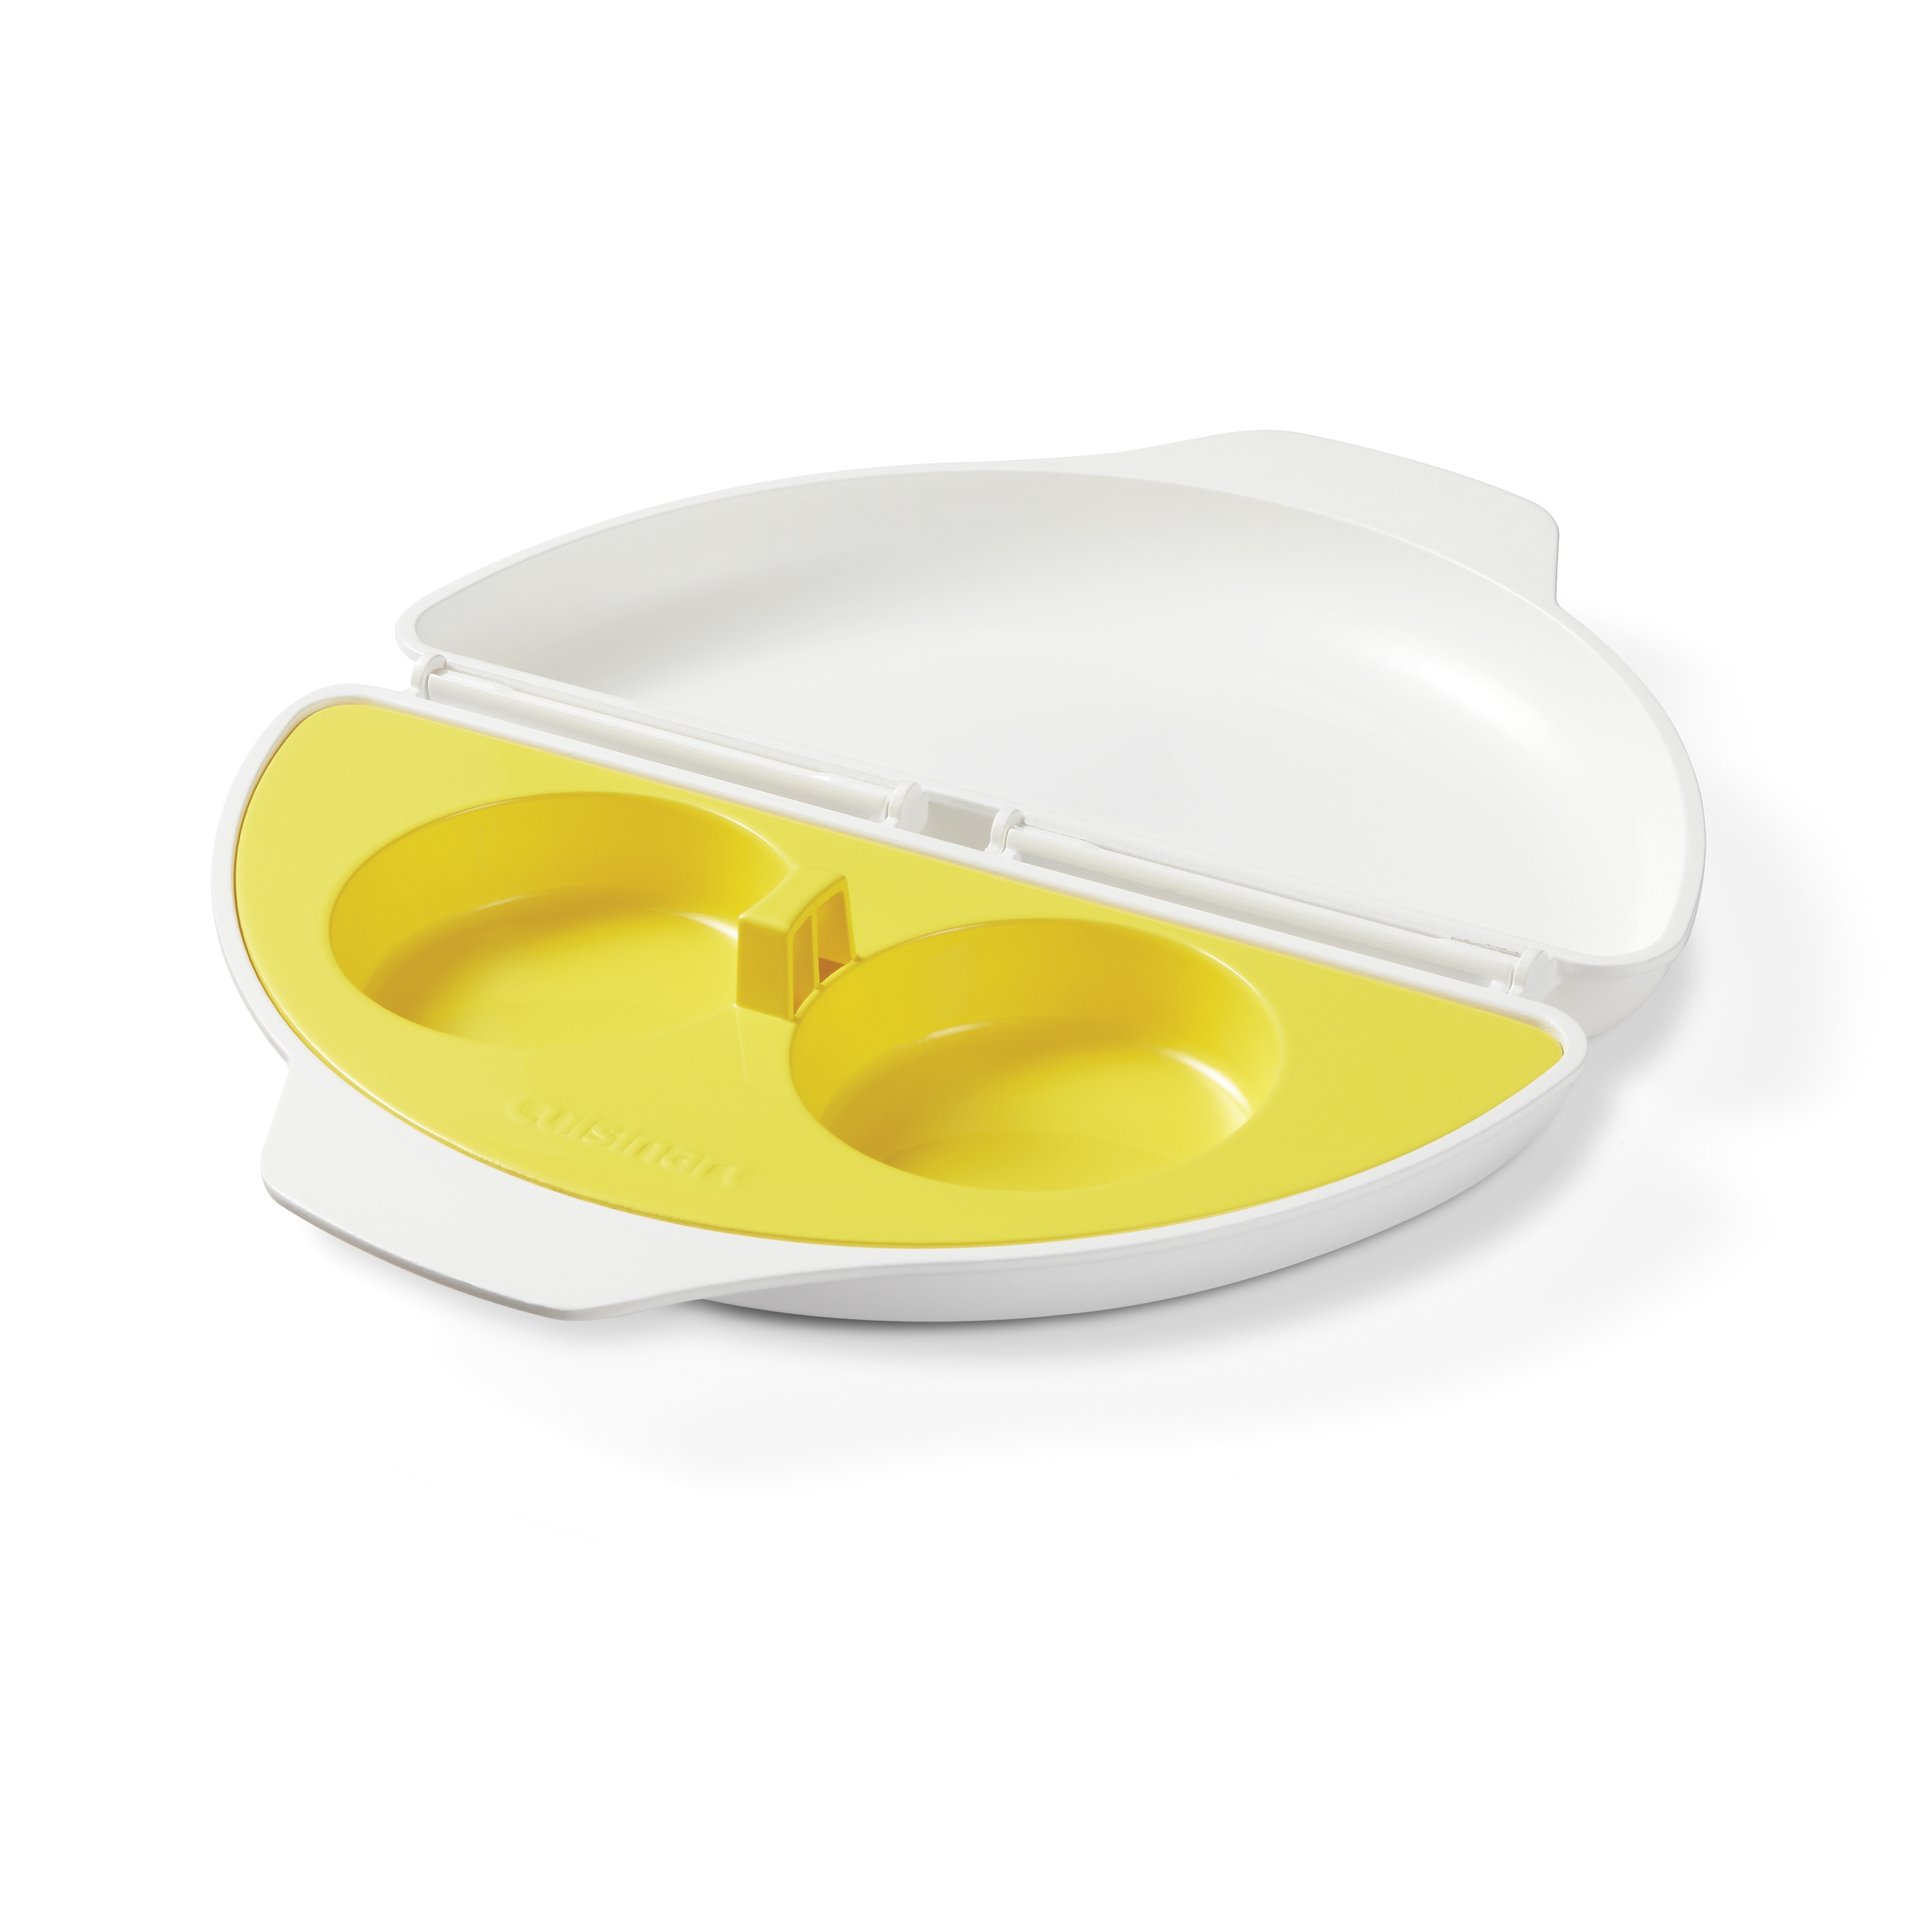 Cuisinart Microwave Egg Cooker, One size, Yellow